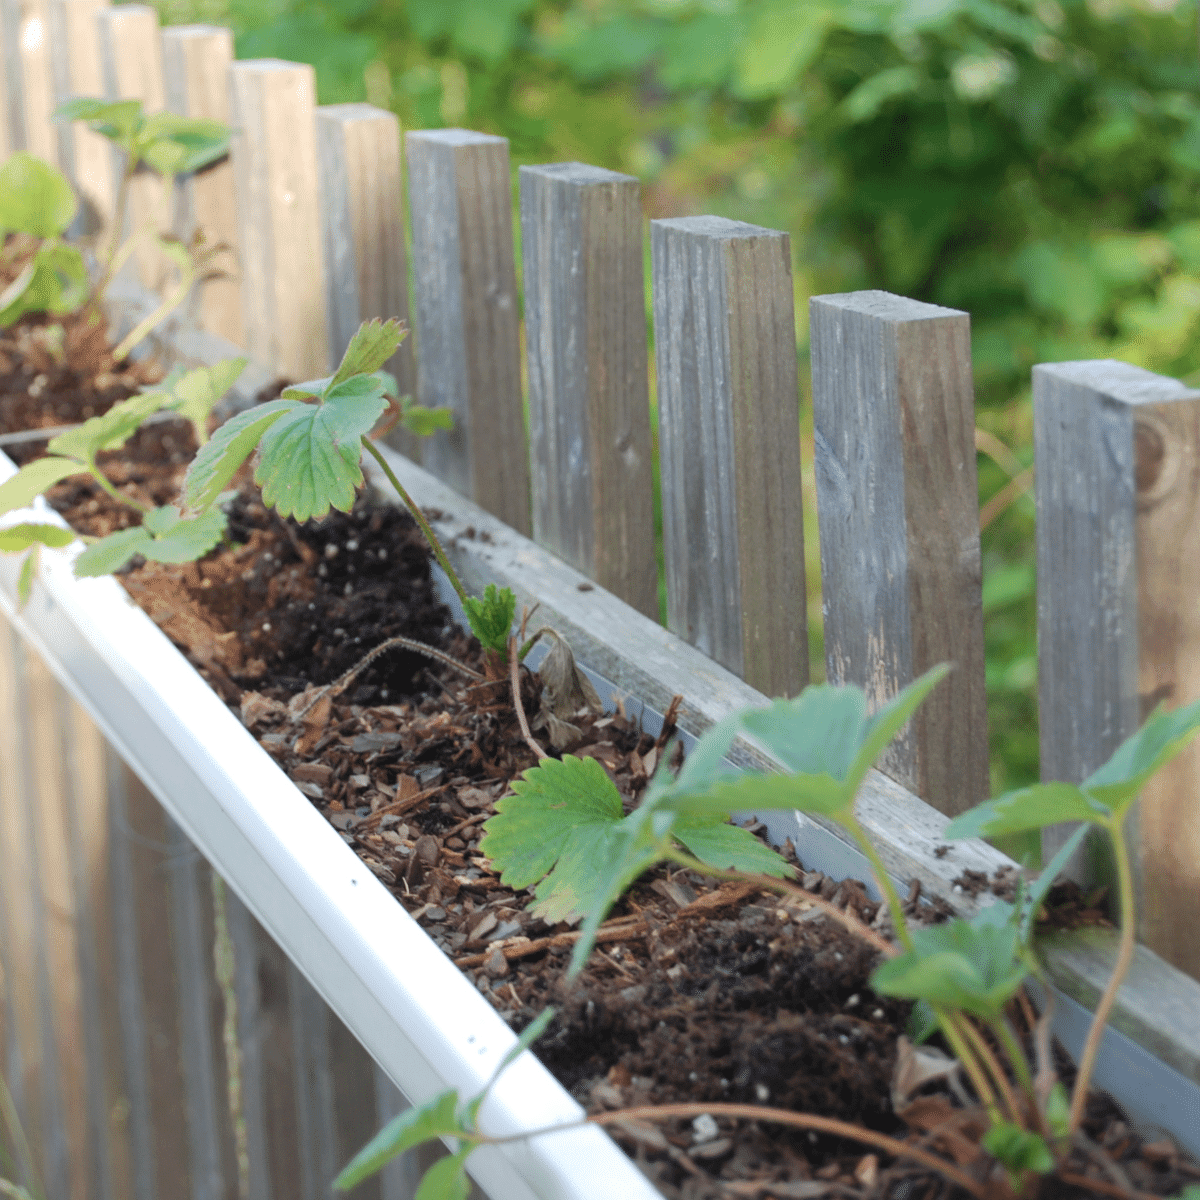 strawberries planted in a gutter